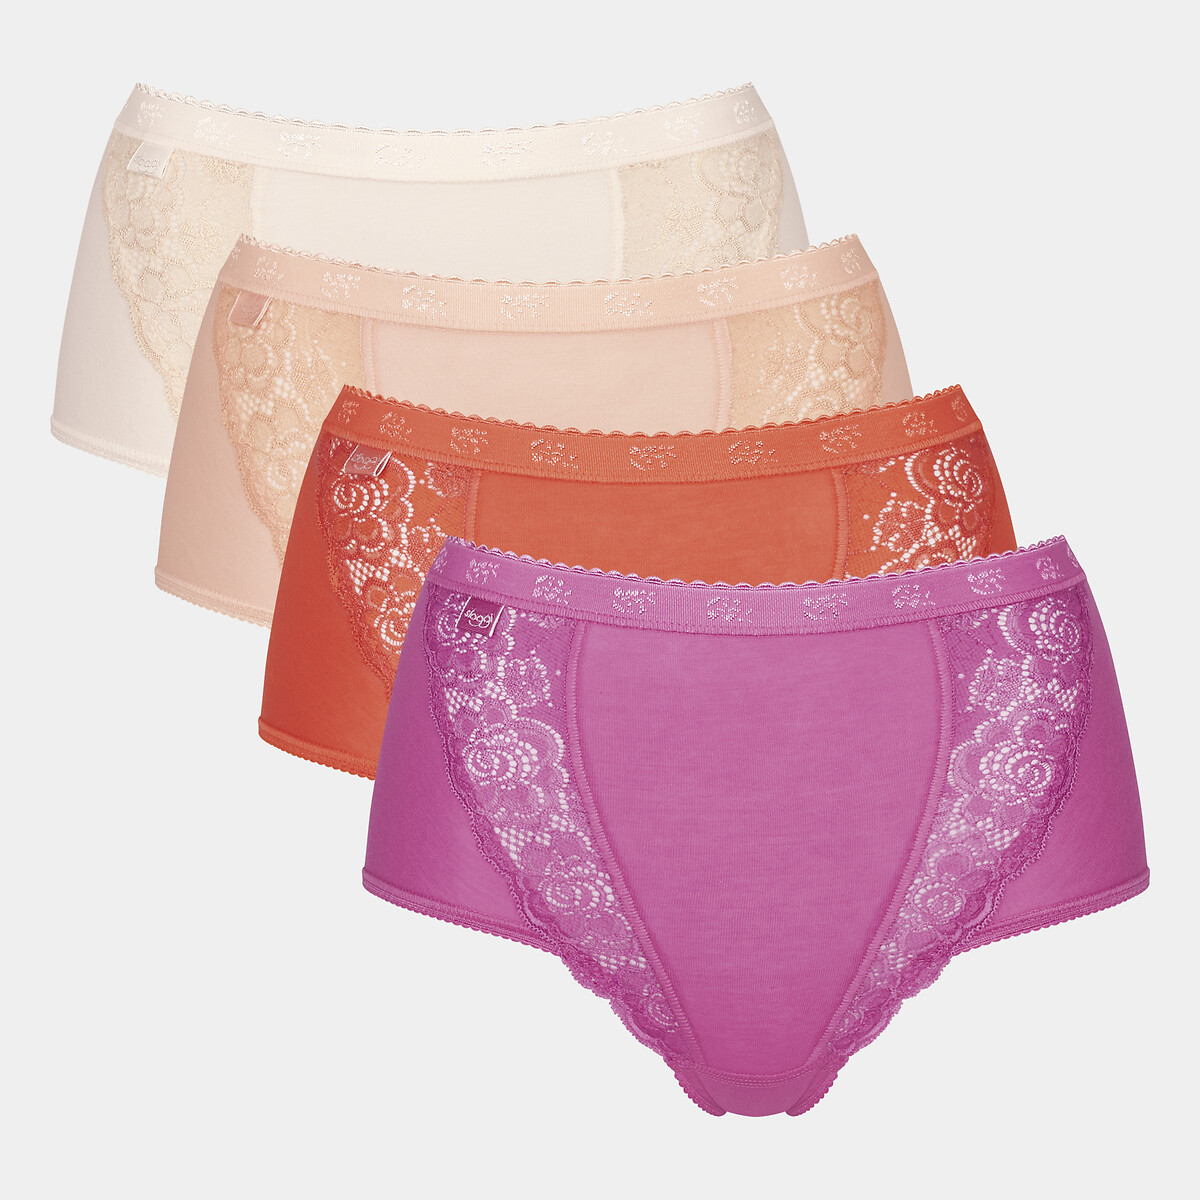 pack of 4 chic maxi knickers in cotton mix